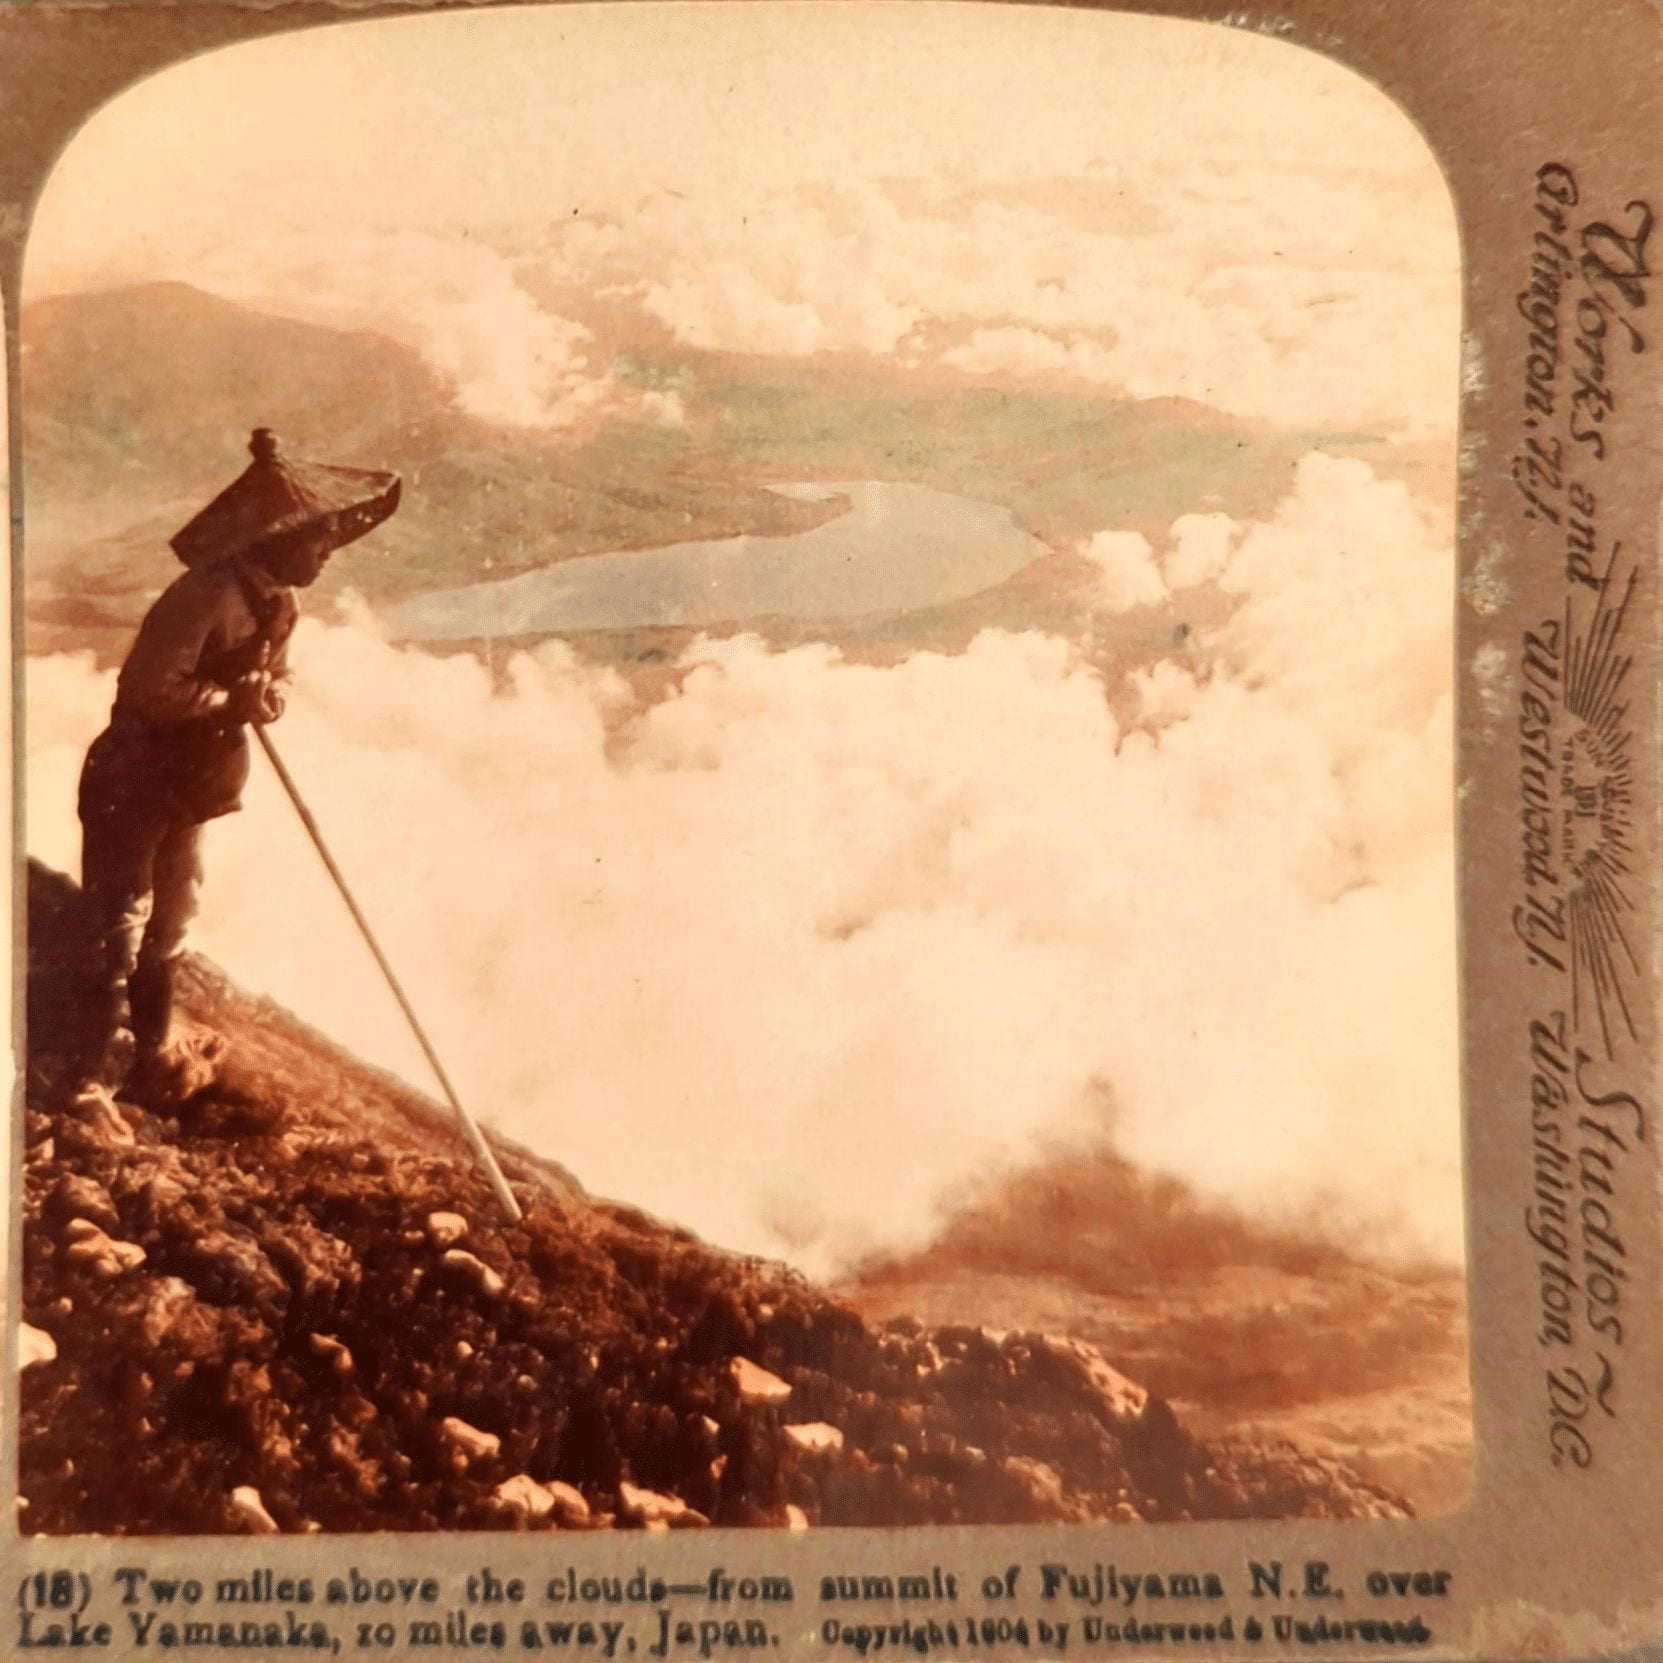 A black and white stereograph of a man wearing a large hat looking at the landscape above the clouds. At the bottom, the image is titled "Two miles above the clouds - from summit of Fujiyama N.E. over Lake Yamanaka, 10 miles away, Japan."